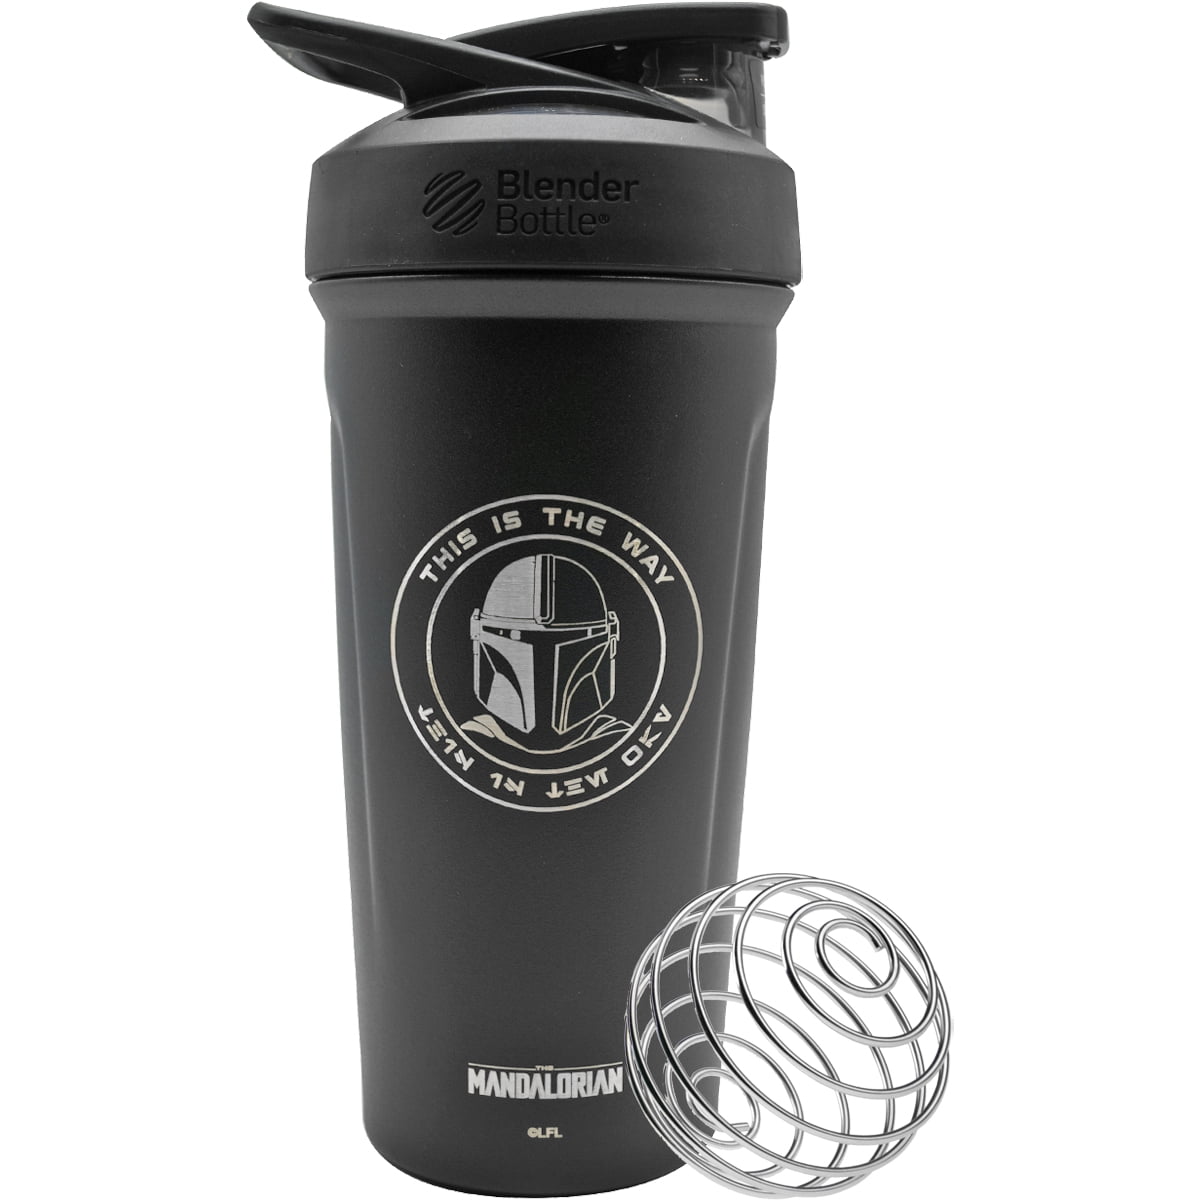 Pro28 The Mandalorian Special Edition Shaker Bottle with Wire Whisk  BlenderBall - Do you even lift (28 fl oz.) by BlenderBottle at the Vitamin  Shoppe